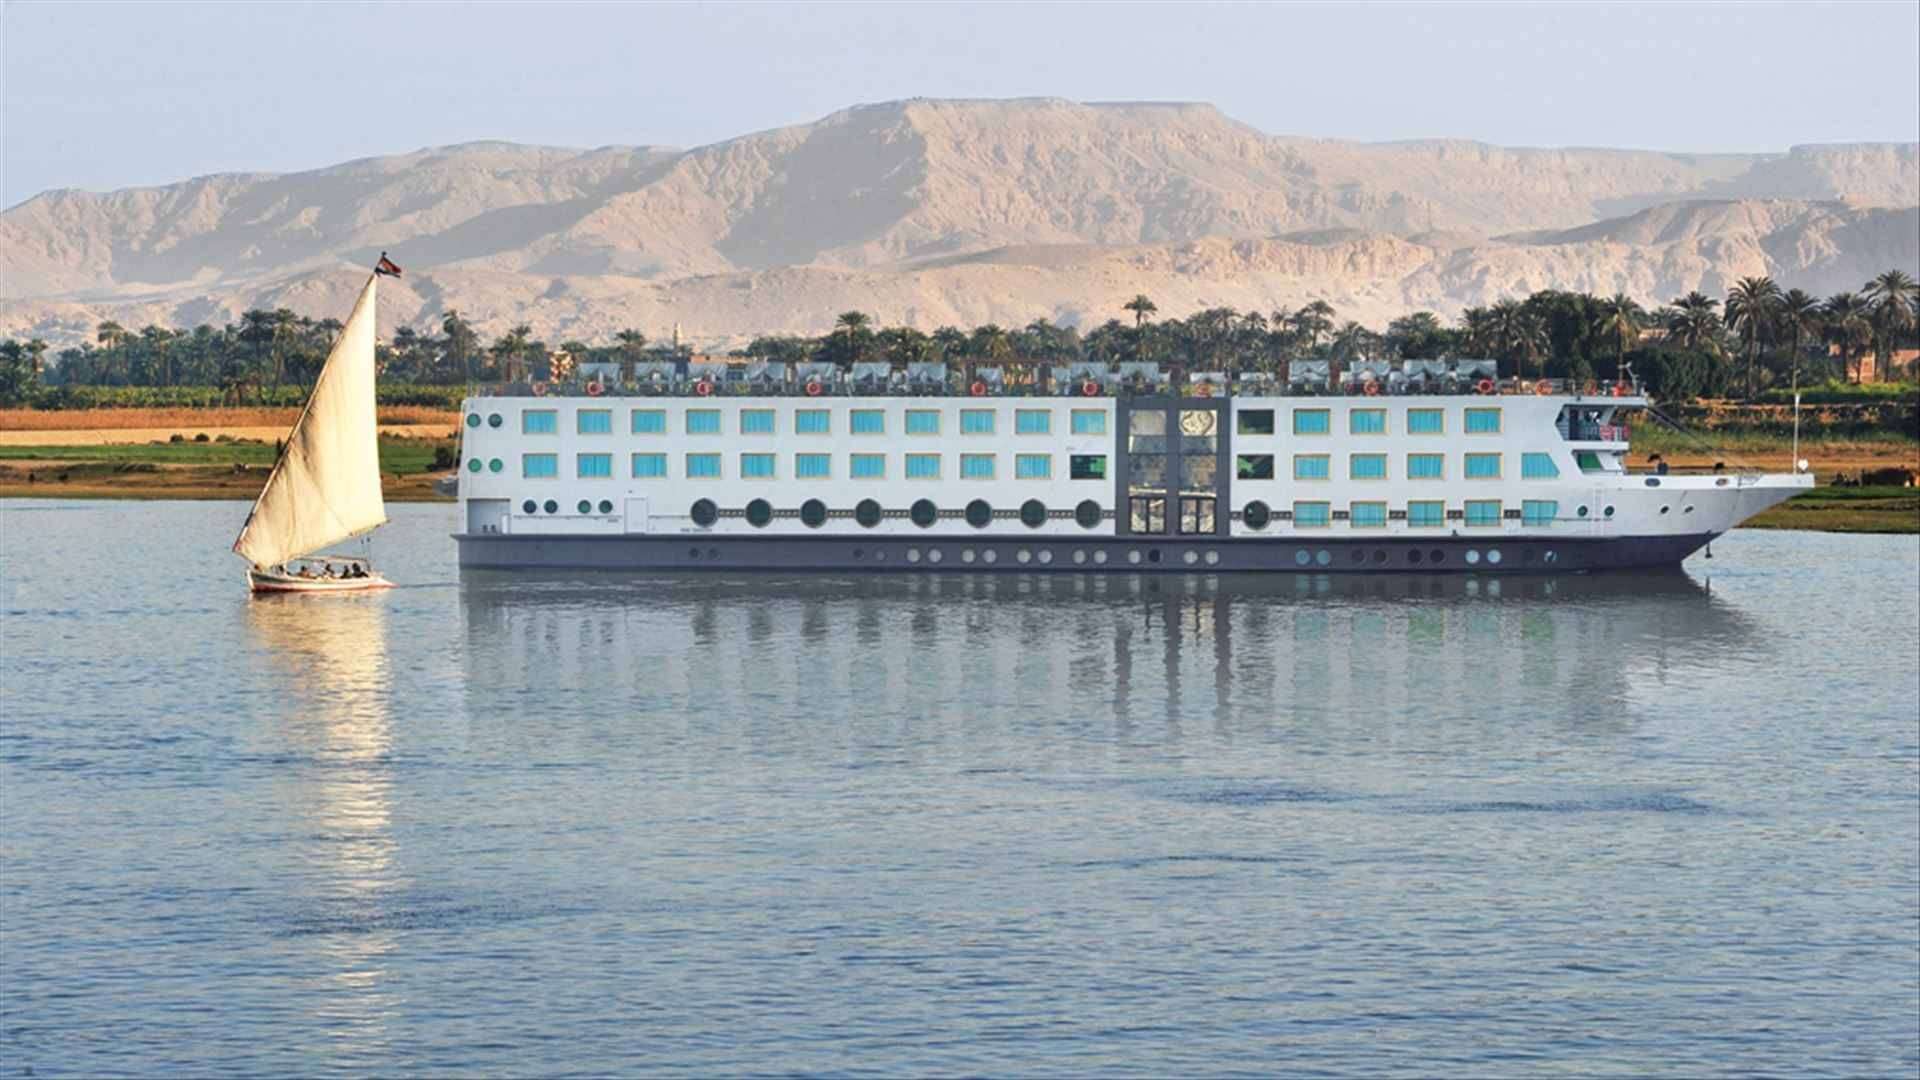 4 Days Nile Cruise From Aswan on M.s Mayfair Cruise